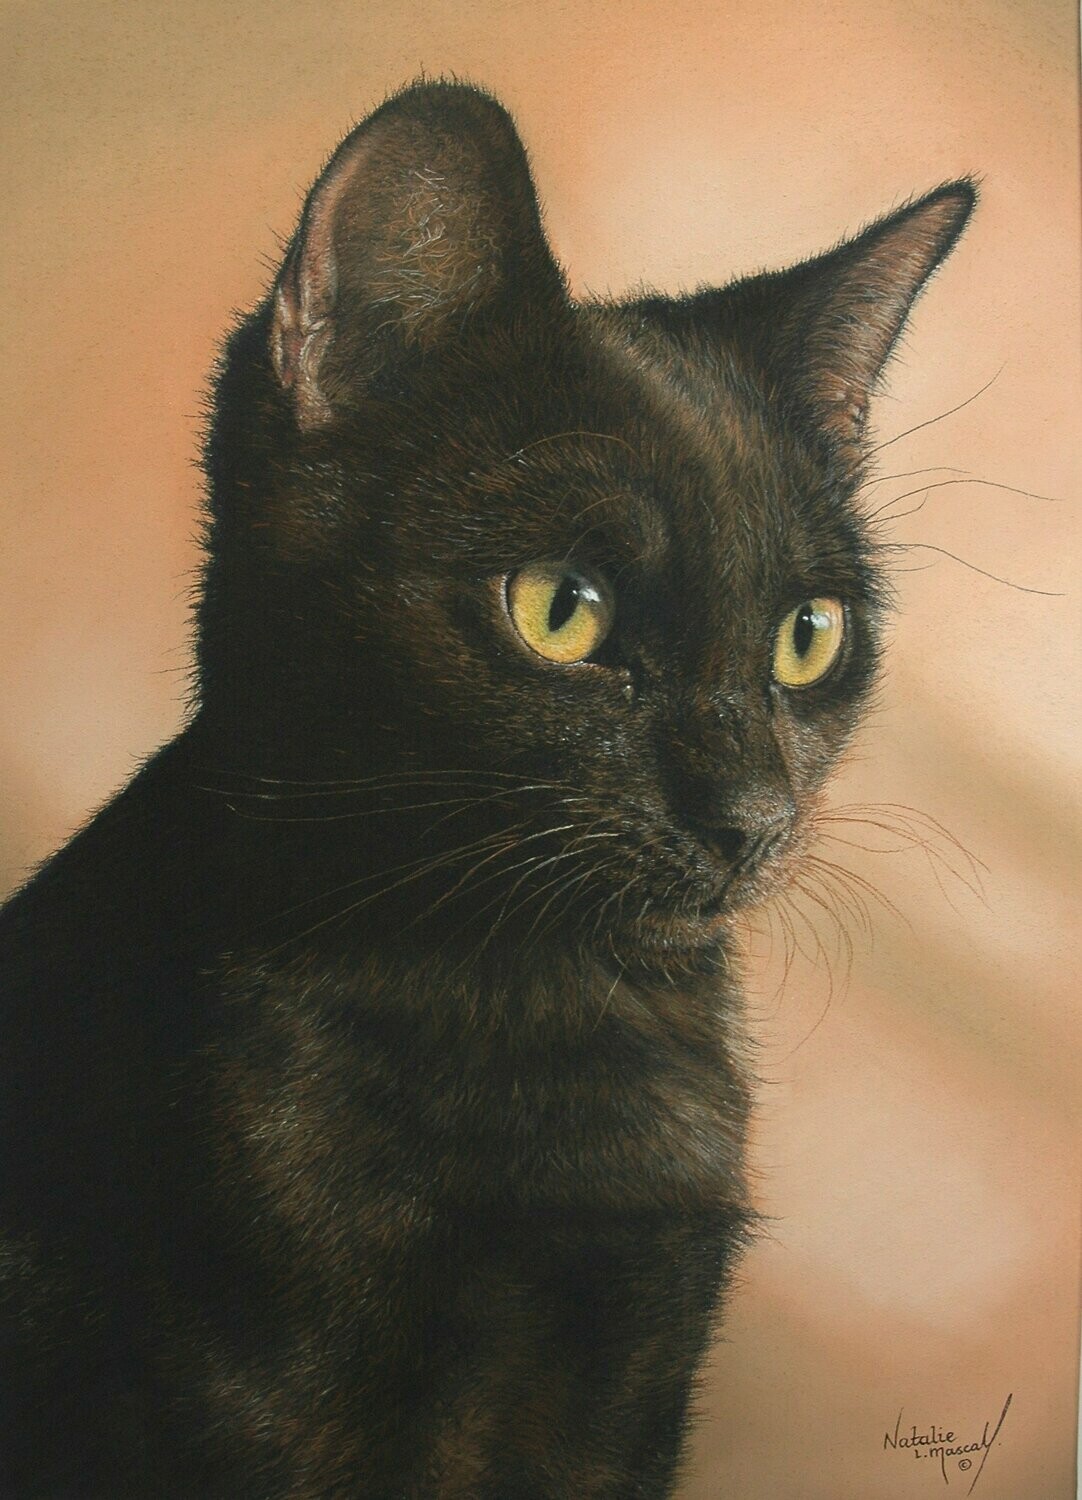 'Mina' a pastel drawing of a black cat by Natalie Mascall